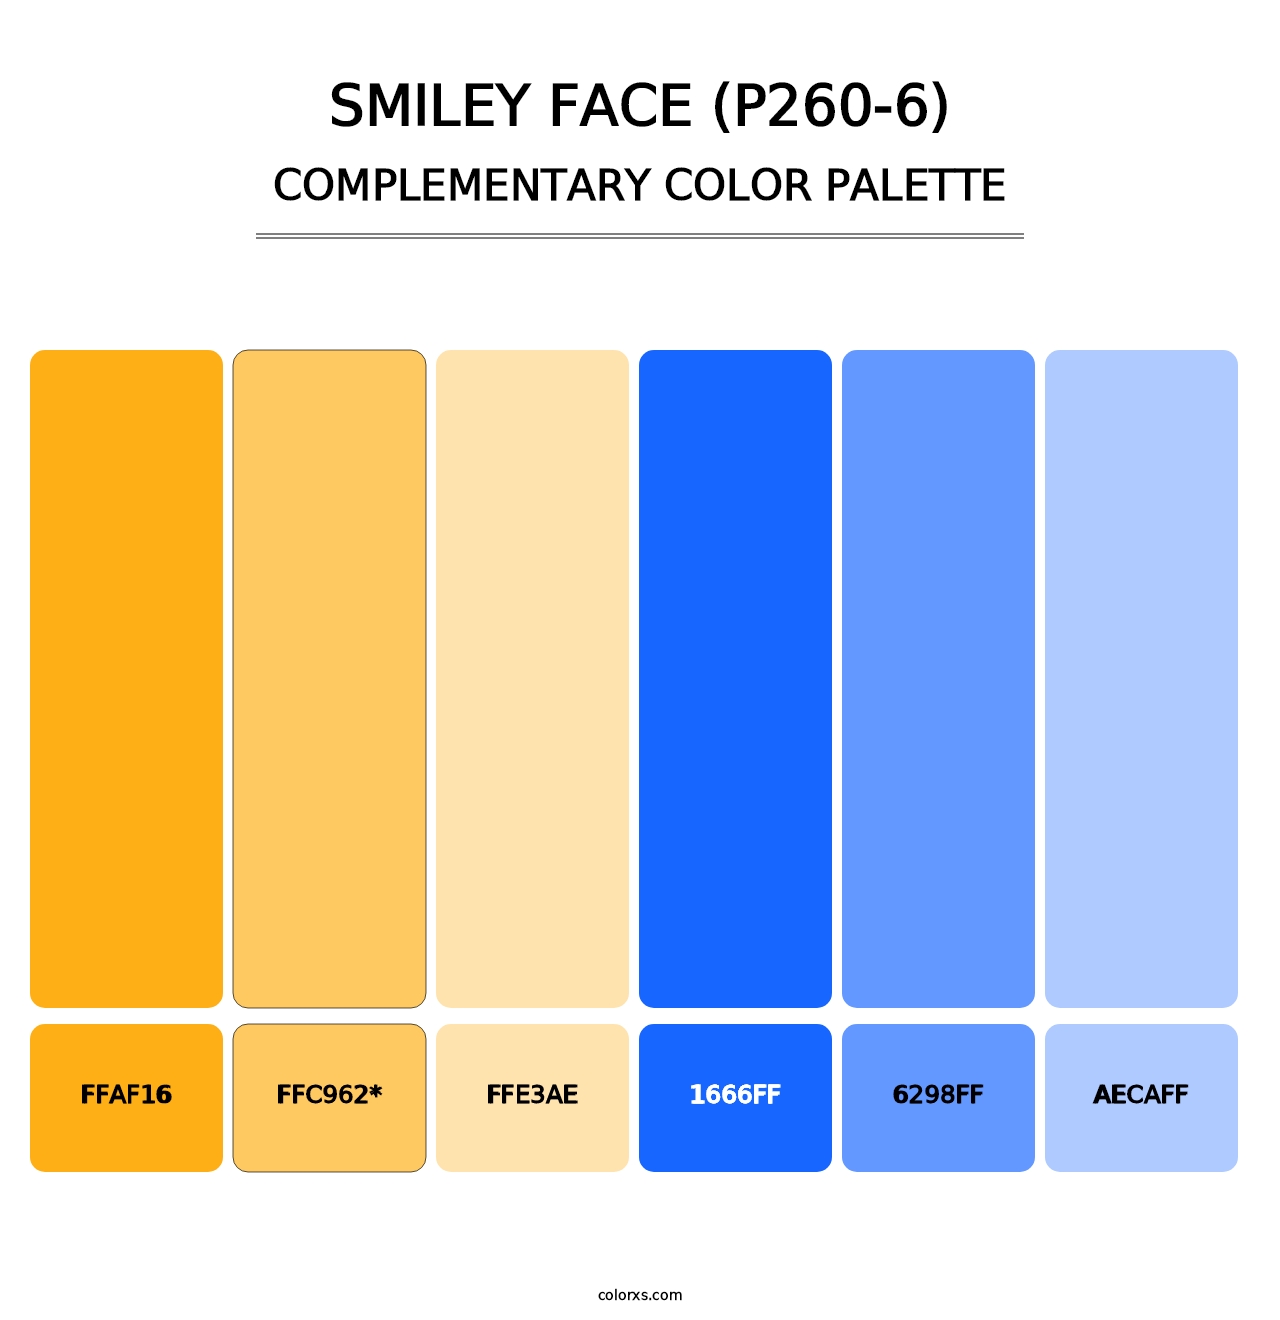 Smiley Face (P260-6) - Complementary Color Palette